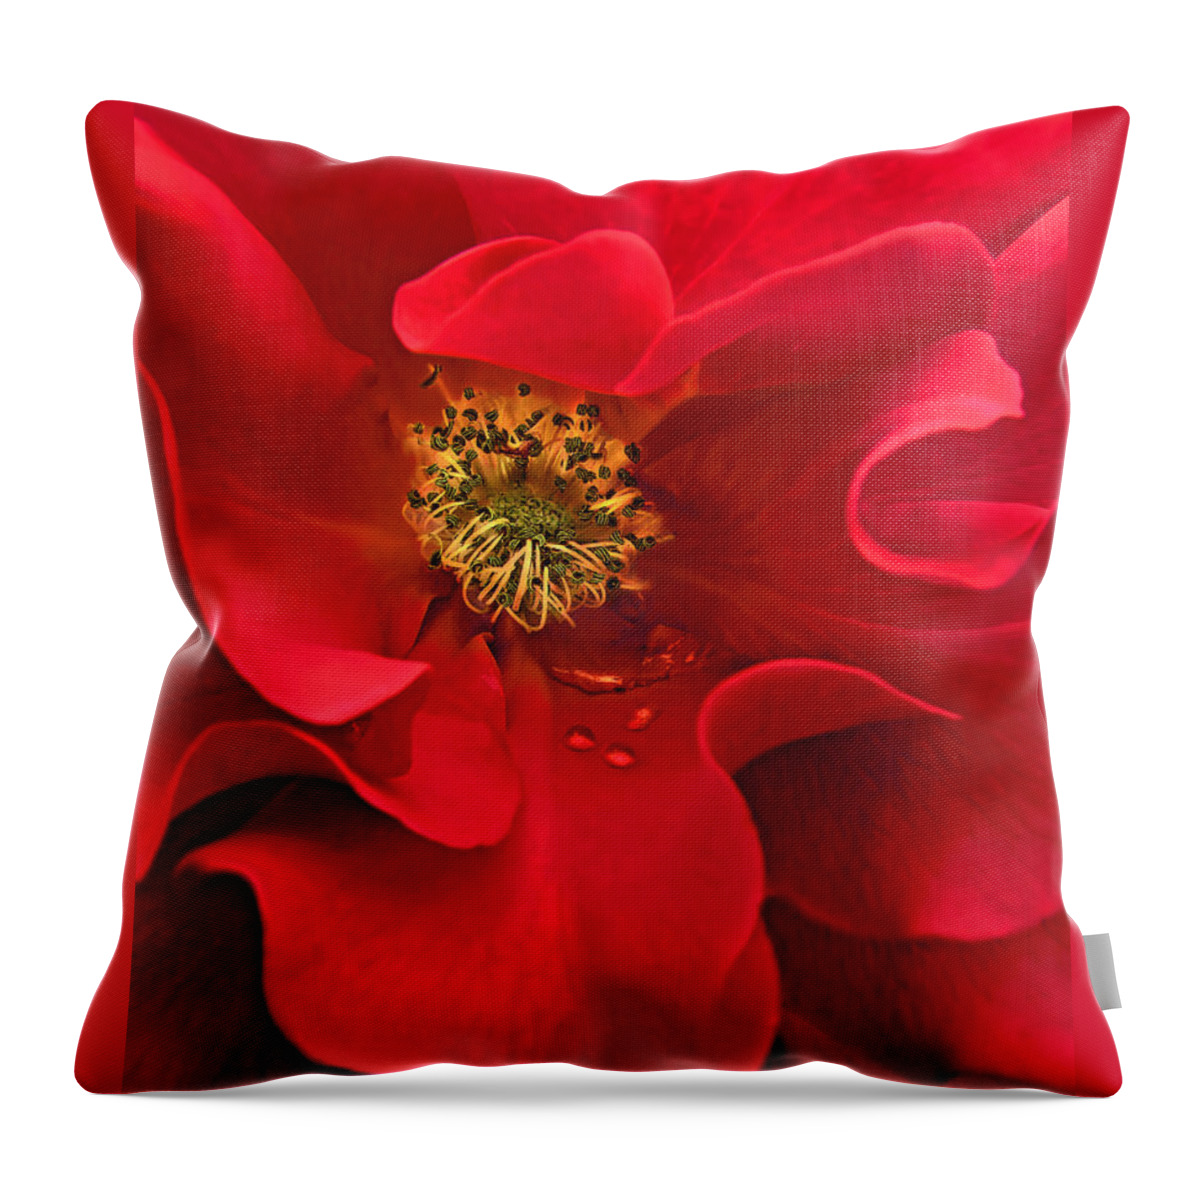 Rose Throw Pillow featuring the photograph Awakening Red Rose Flower by Jennie Marie Schell